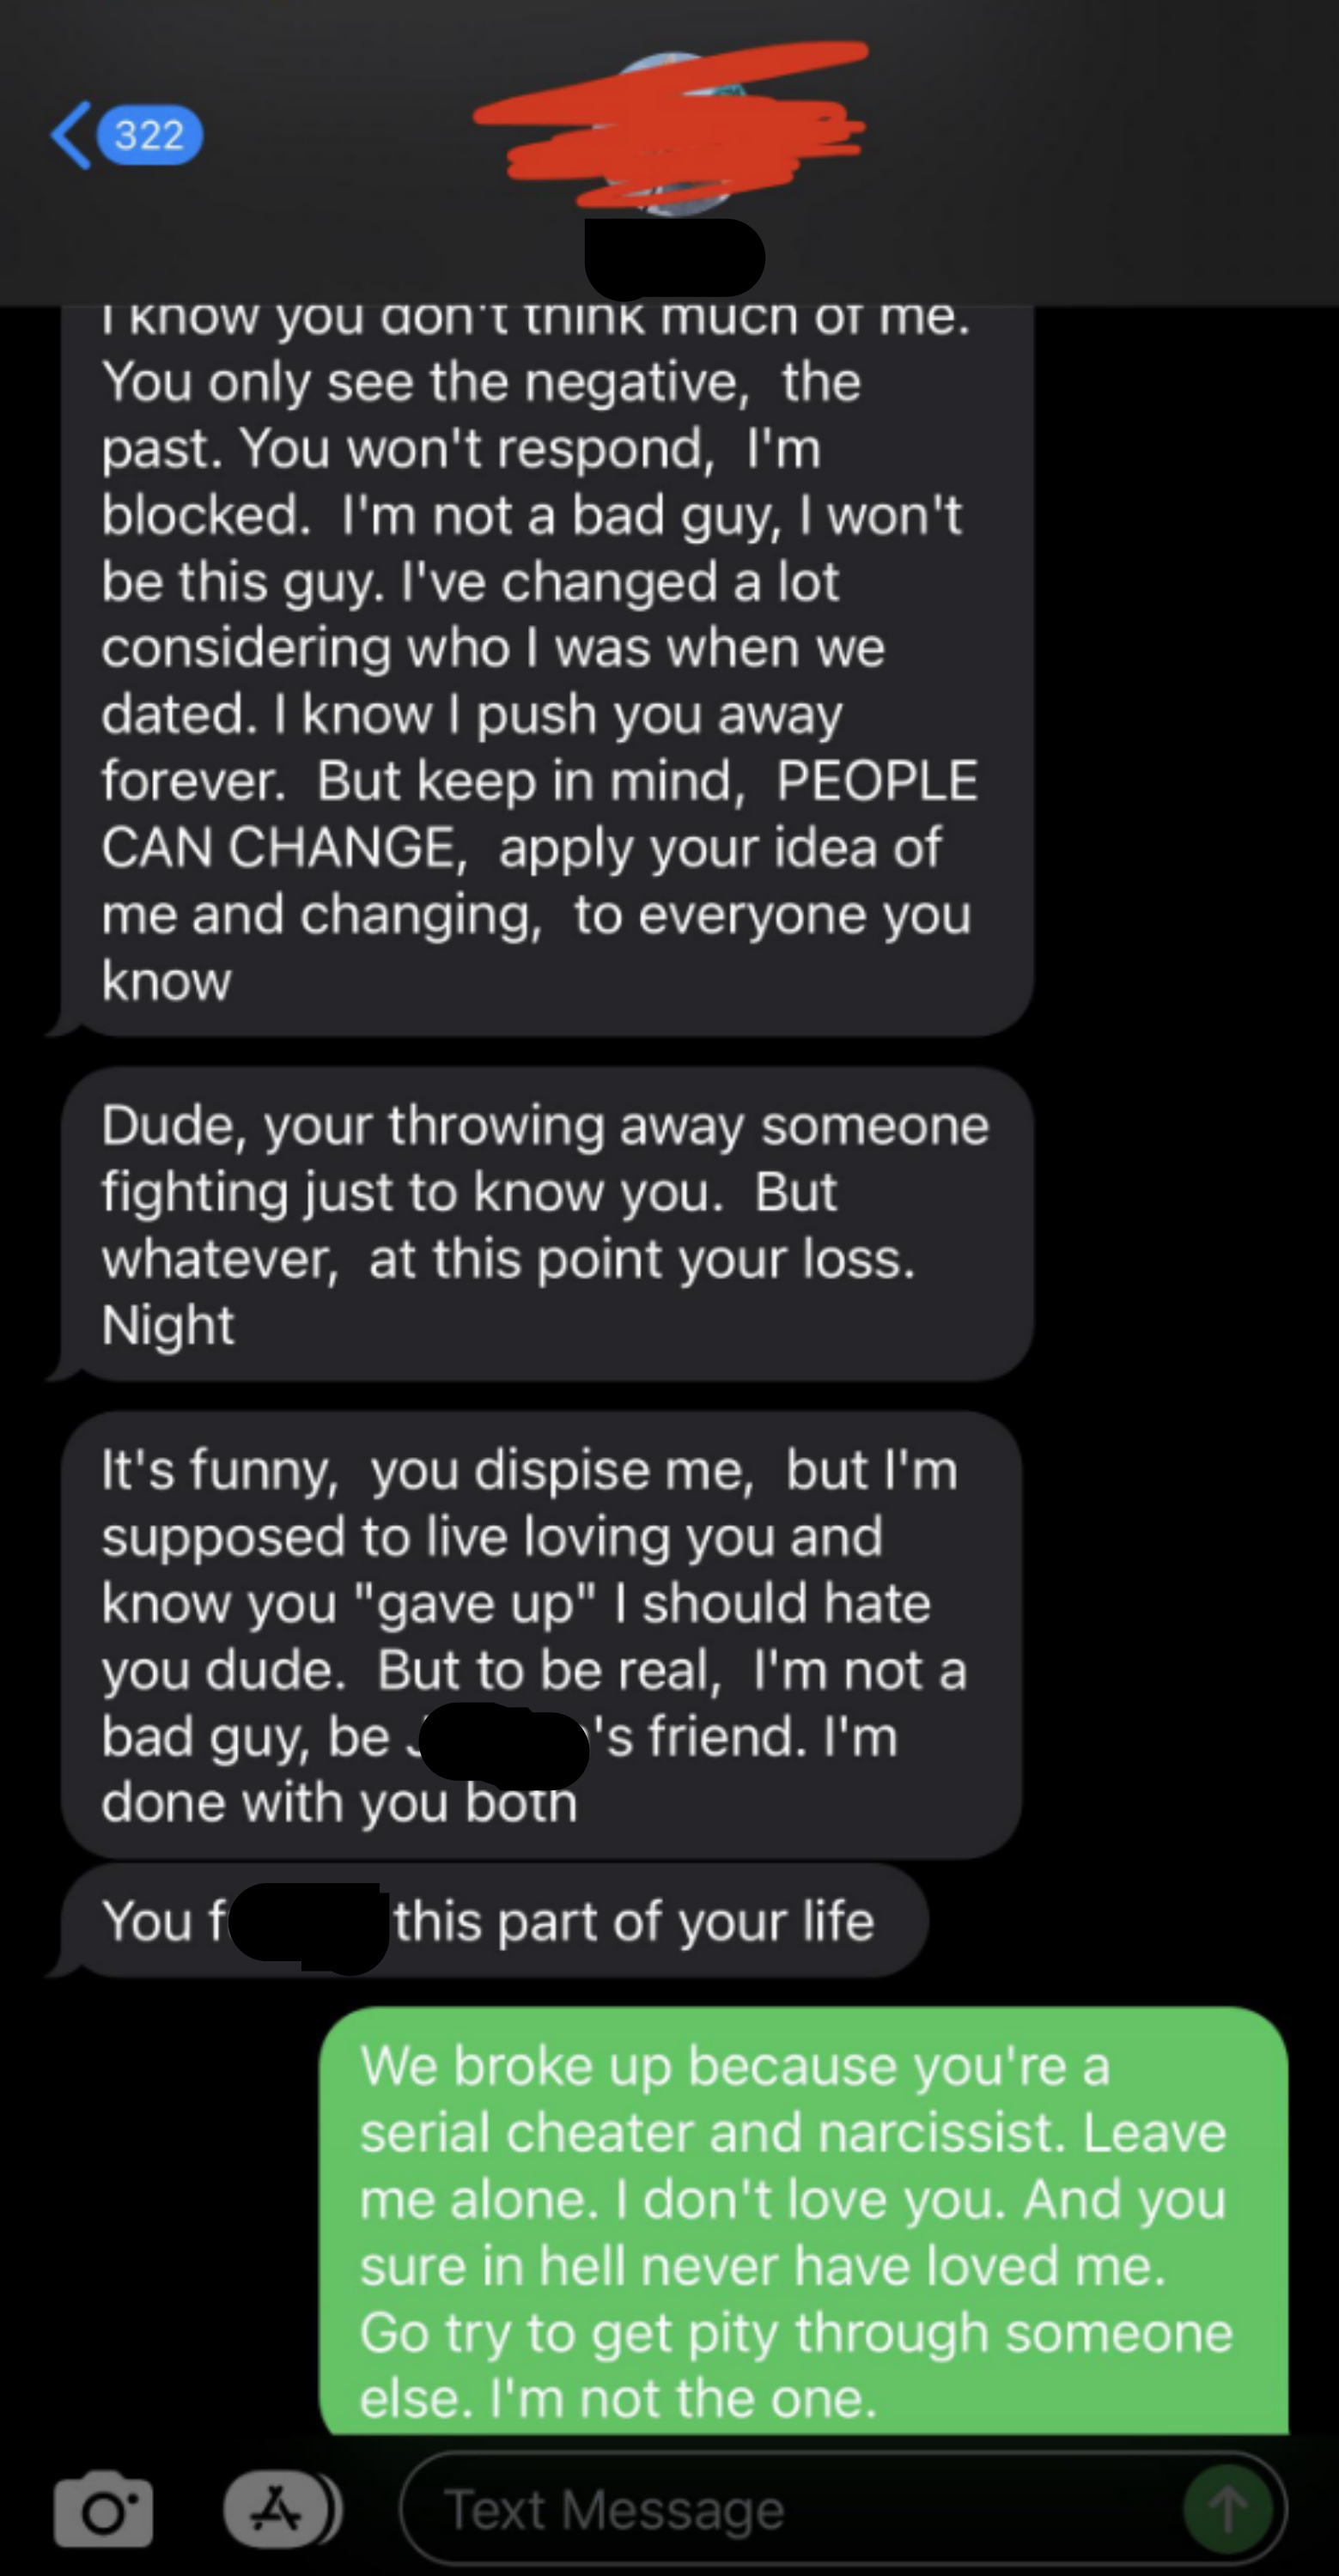 He says they only see the negative; says he&#x27;s not a bad guy, he&#x27;s changed, &quot;but at this point your loss&quot;; response: &quot;We broke up because you&#x27;re a serial cheater and narcissist; leave me alone, I don&#x27;t love you and you sure in hell never loved me&quot;